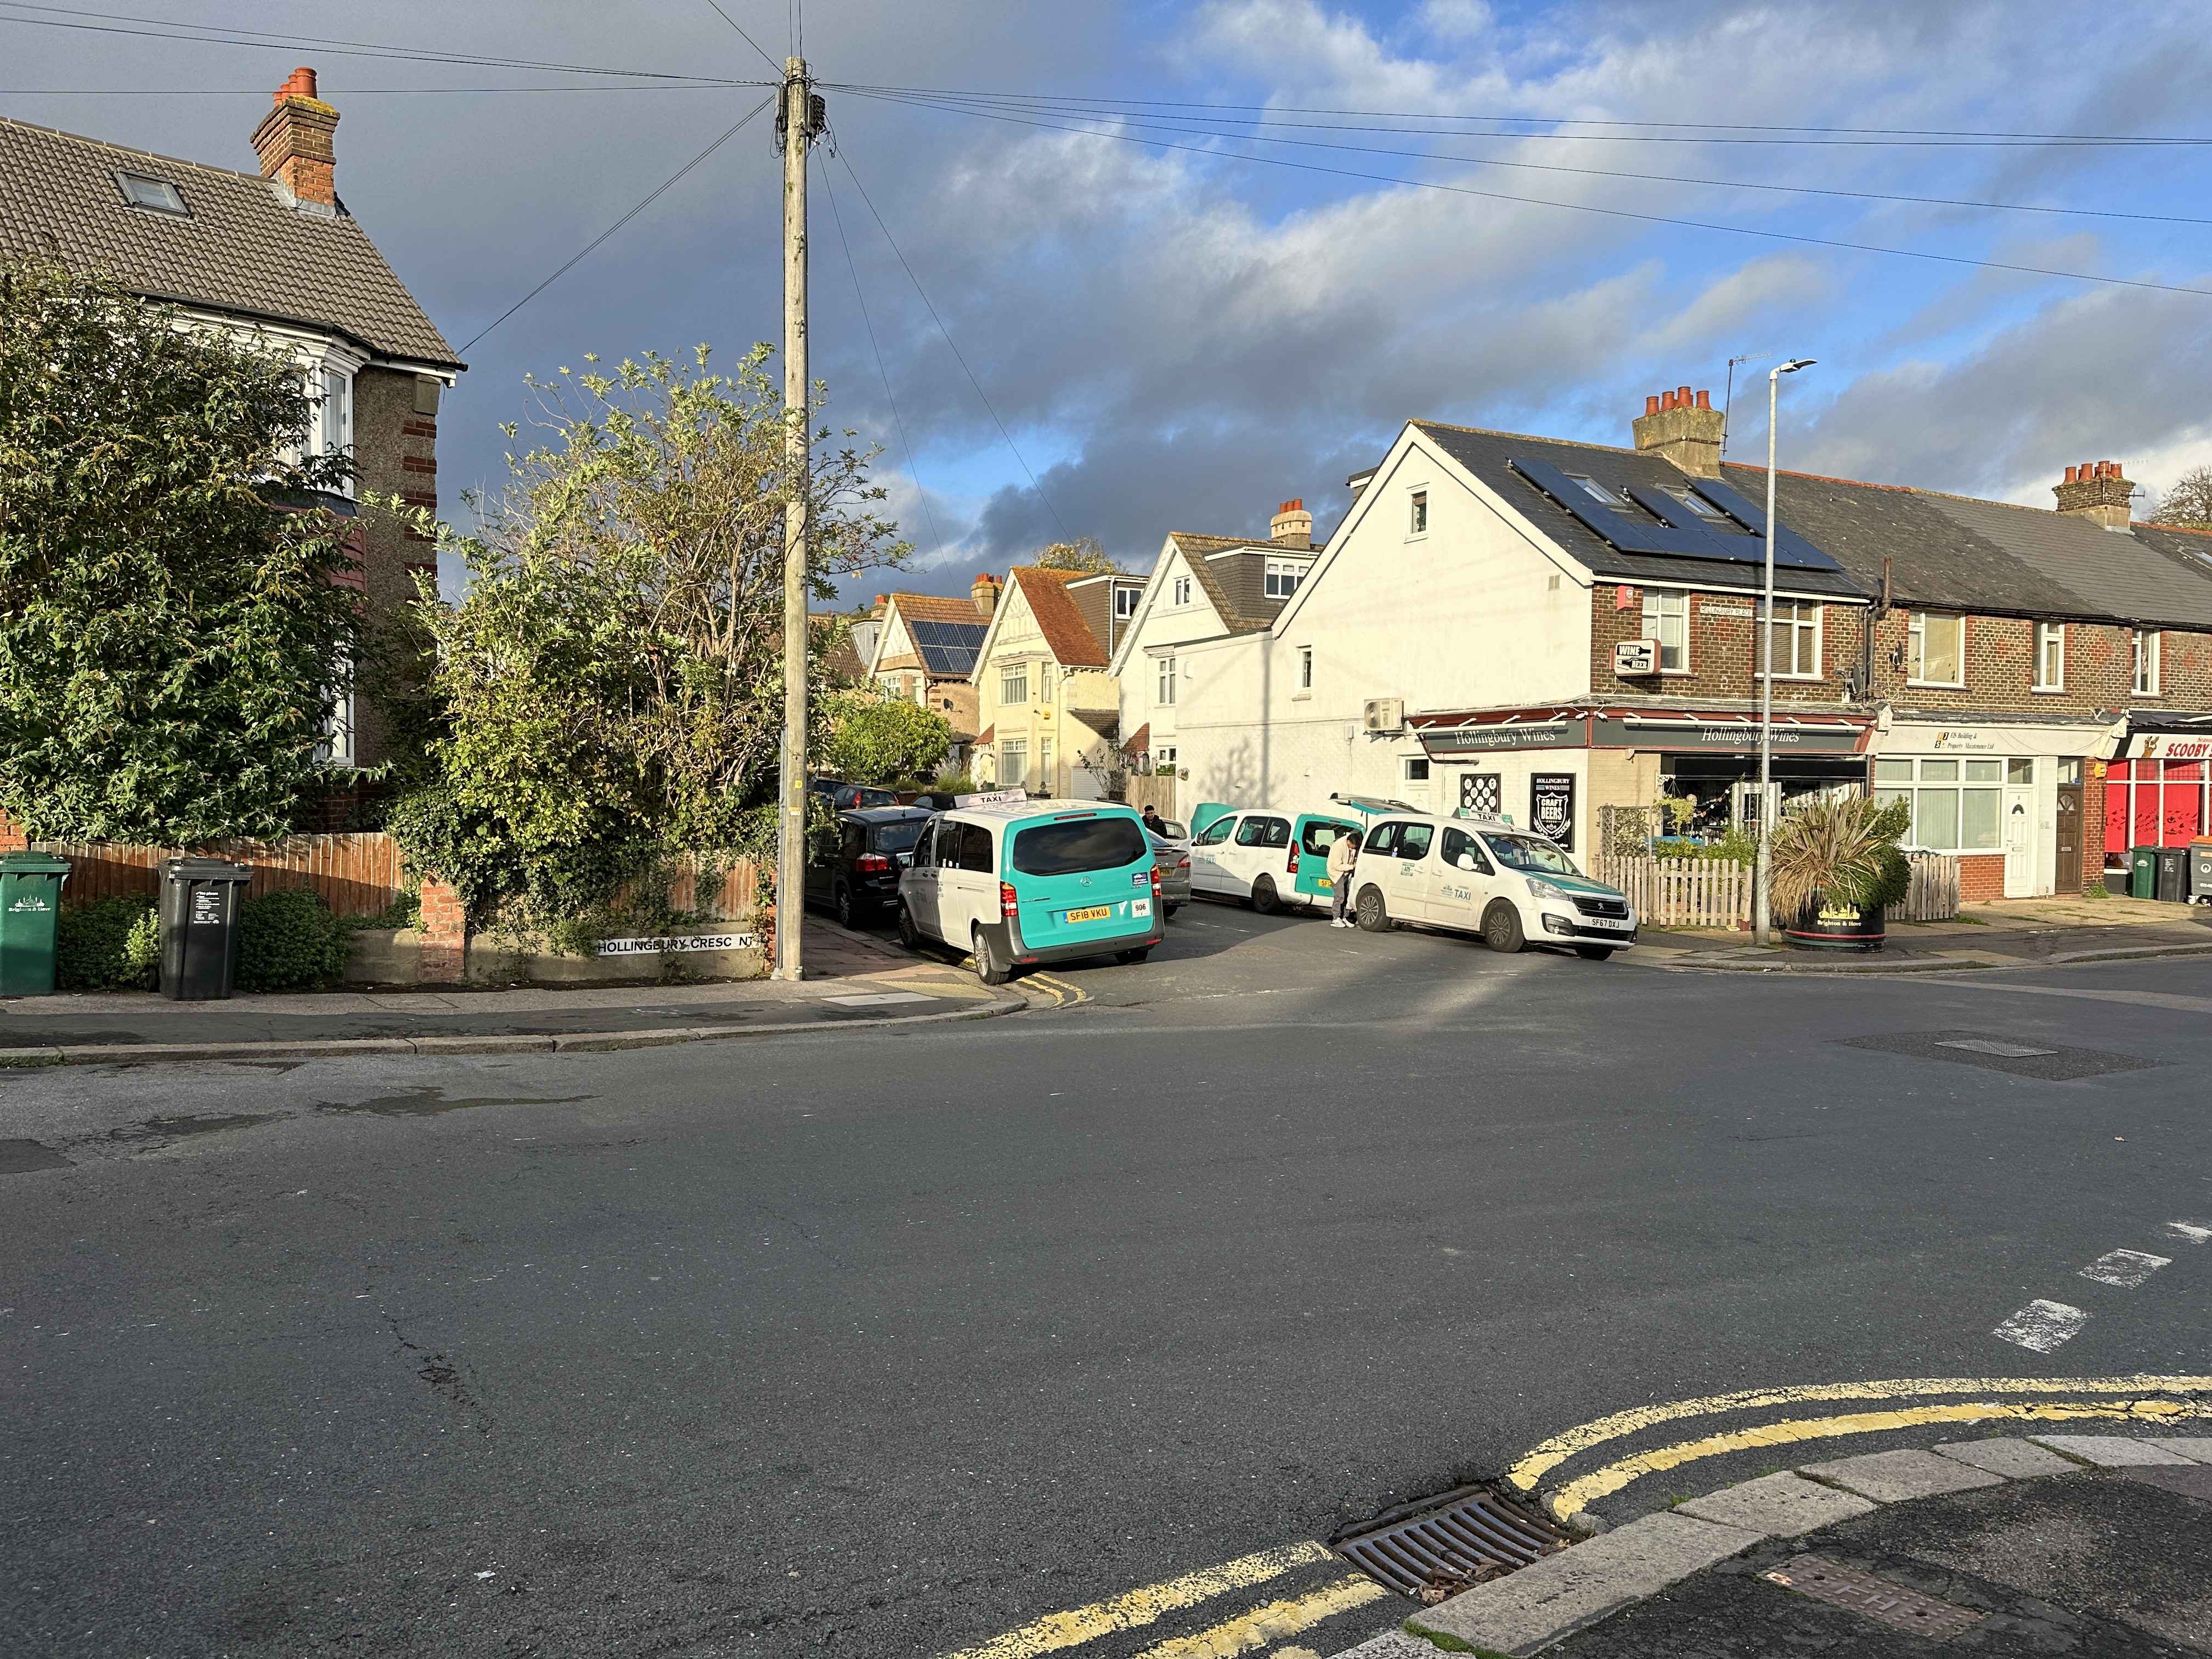 Photograph of LFZ 4240 - a White Peugeot Partner taxi parked in Hollingdean by a non-resident. The third of three photographs supplied by the residents of Hollingdean.